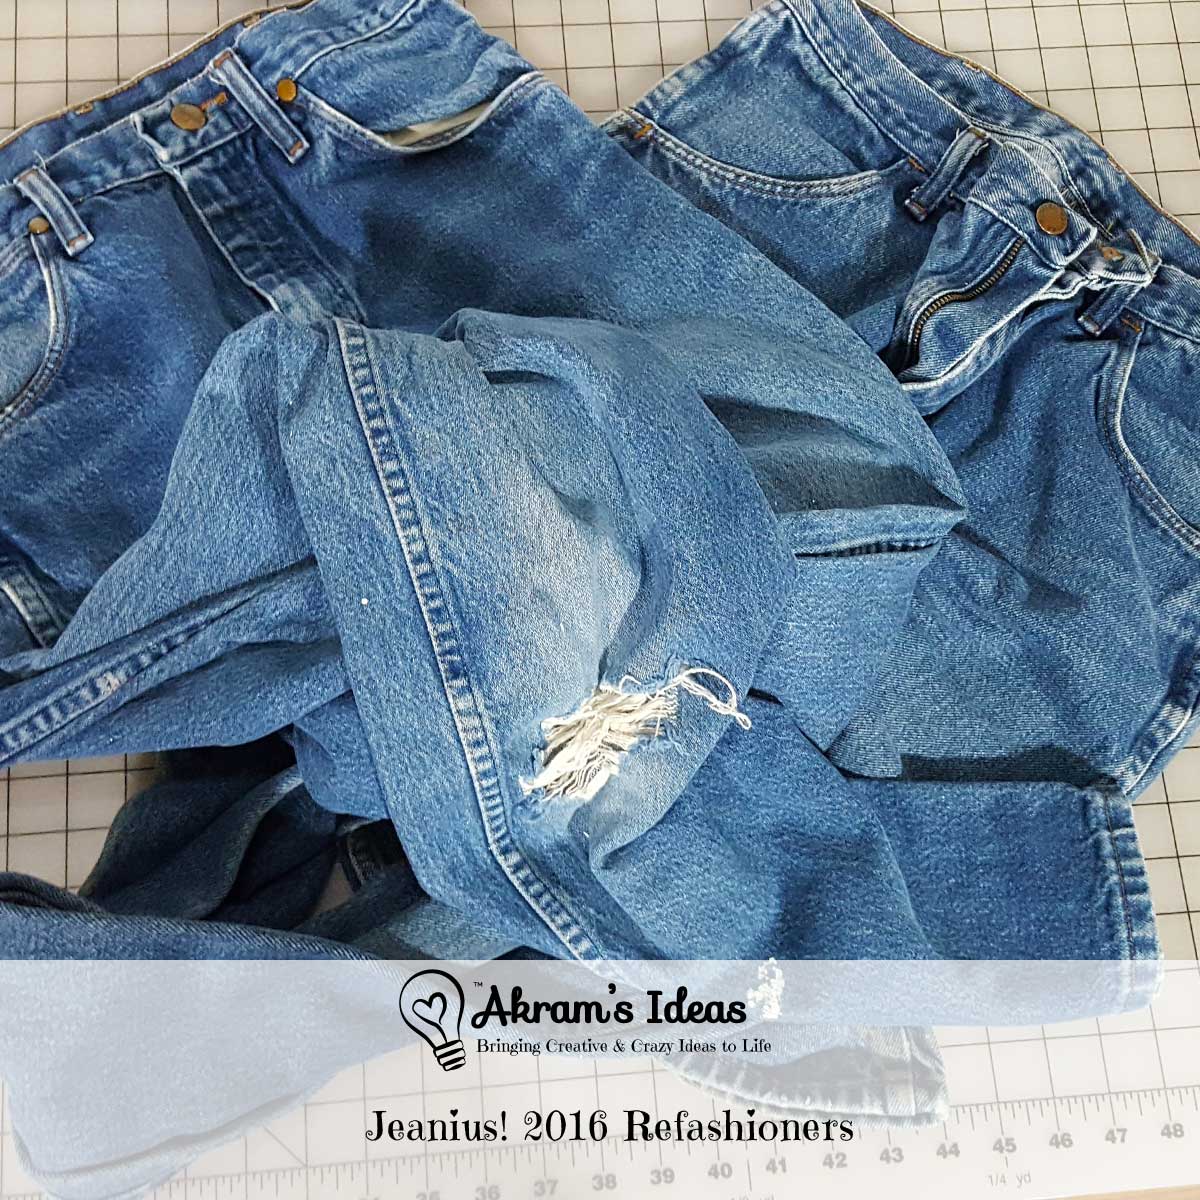 Learn more about The Refashioners challenge where participants are to refashion a garment. This year’s challenge is refashioning jeans.